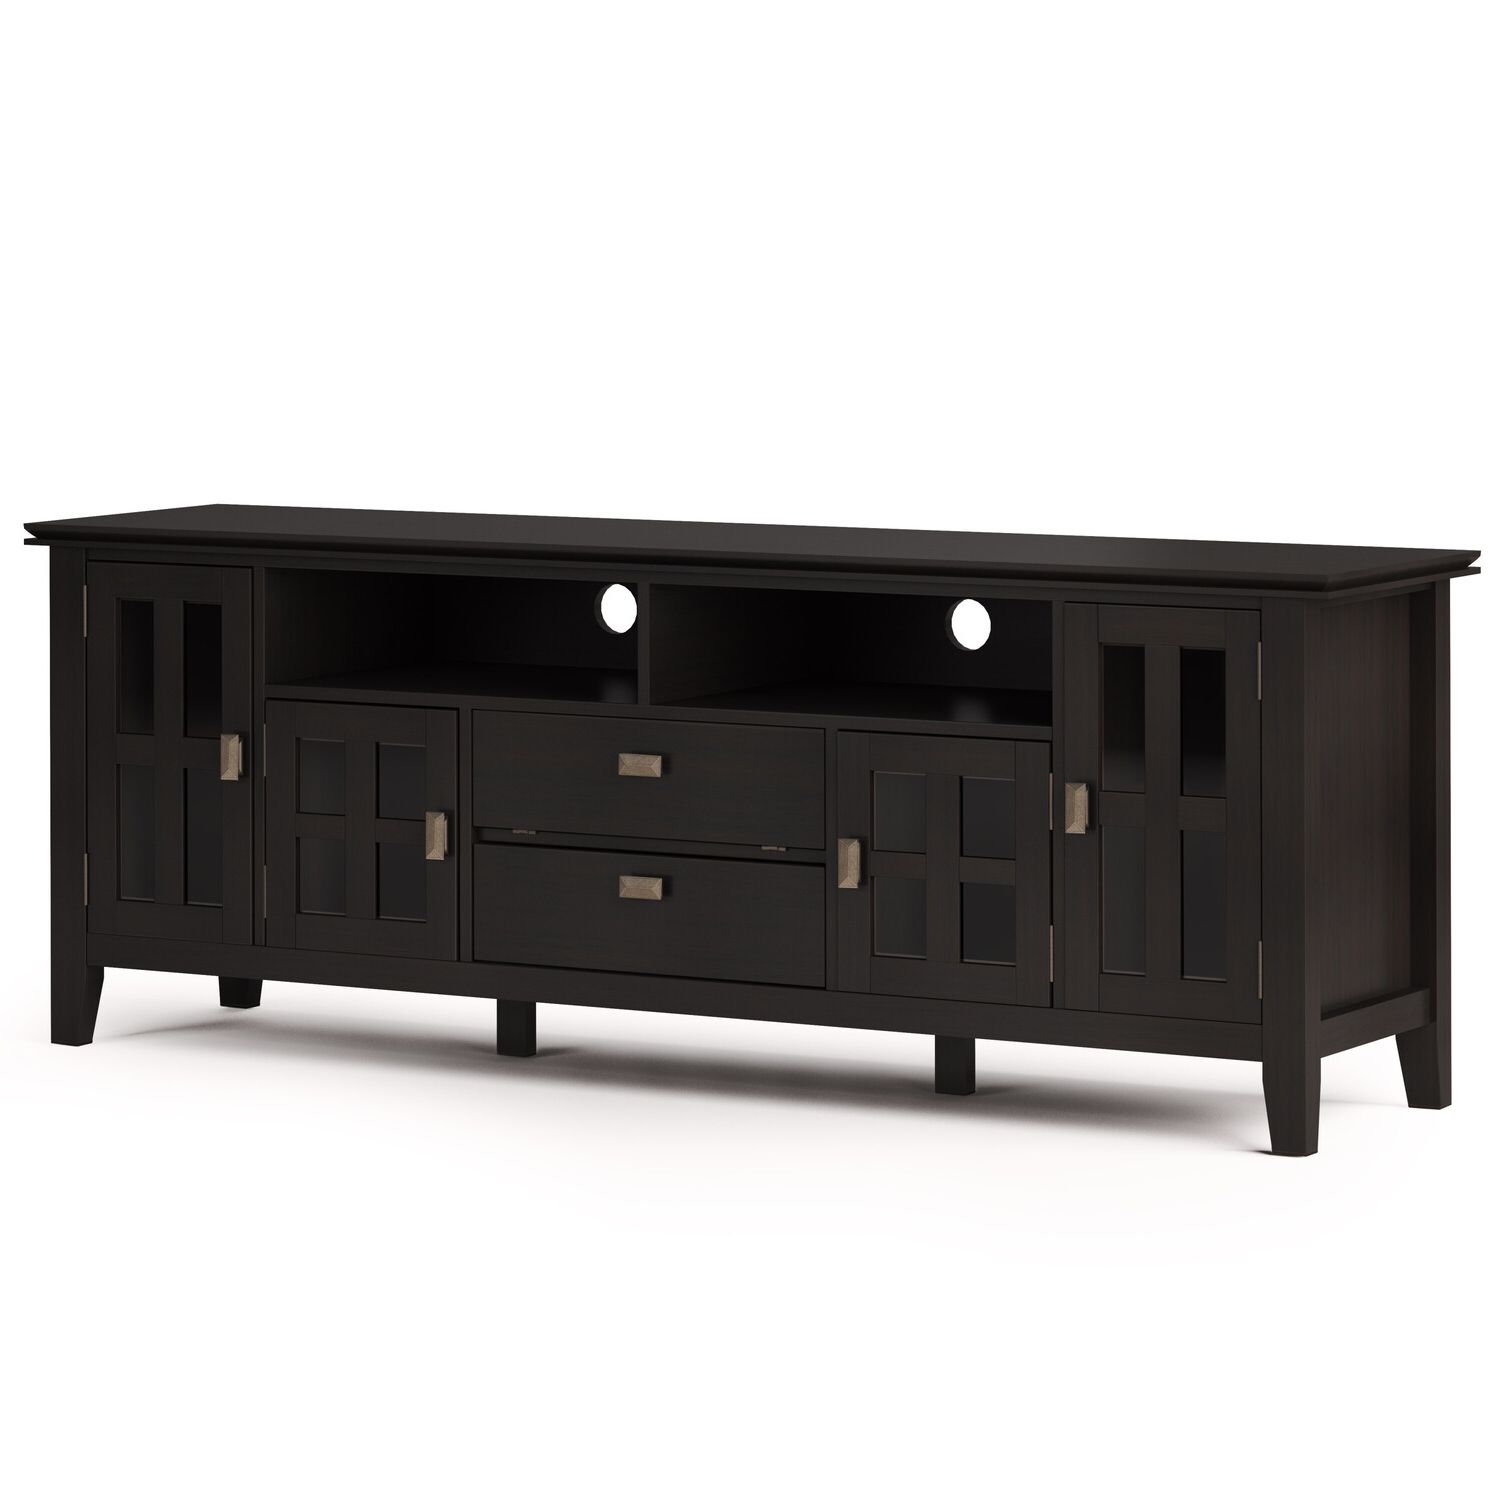 Simpli Home Artisan Solid Wood 72 Inch Wide Contemporary With Regard To Greenwich Wide Tv Stands (Gallery 5 of 20)